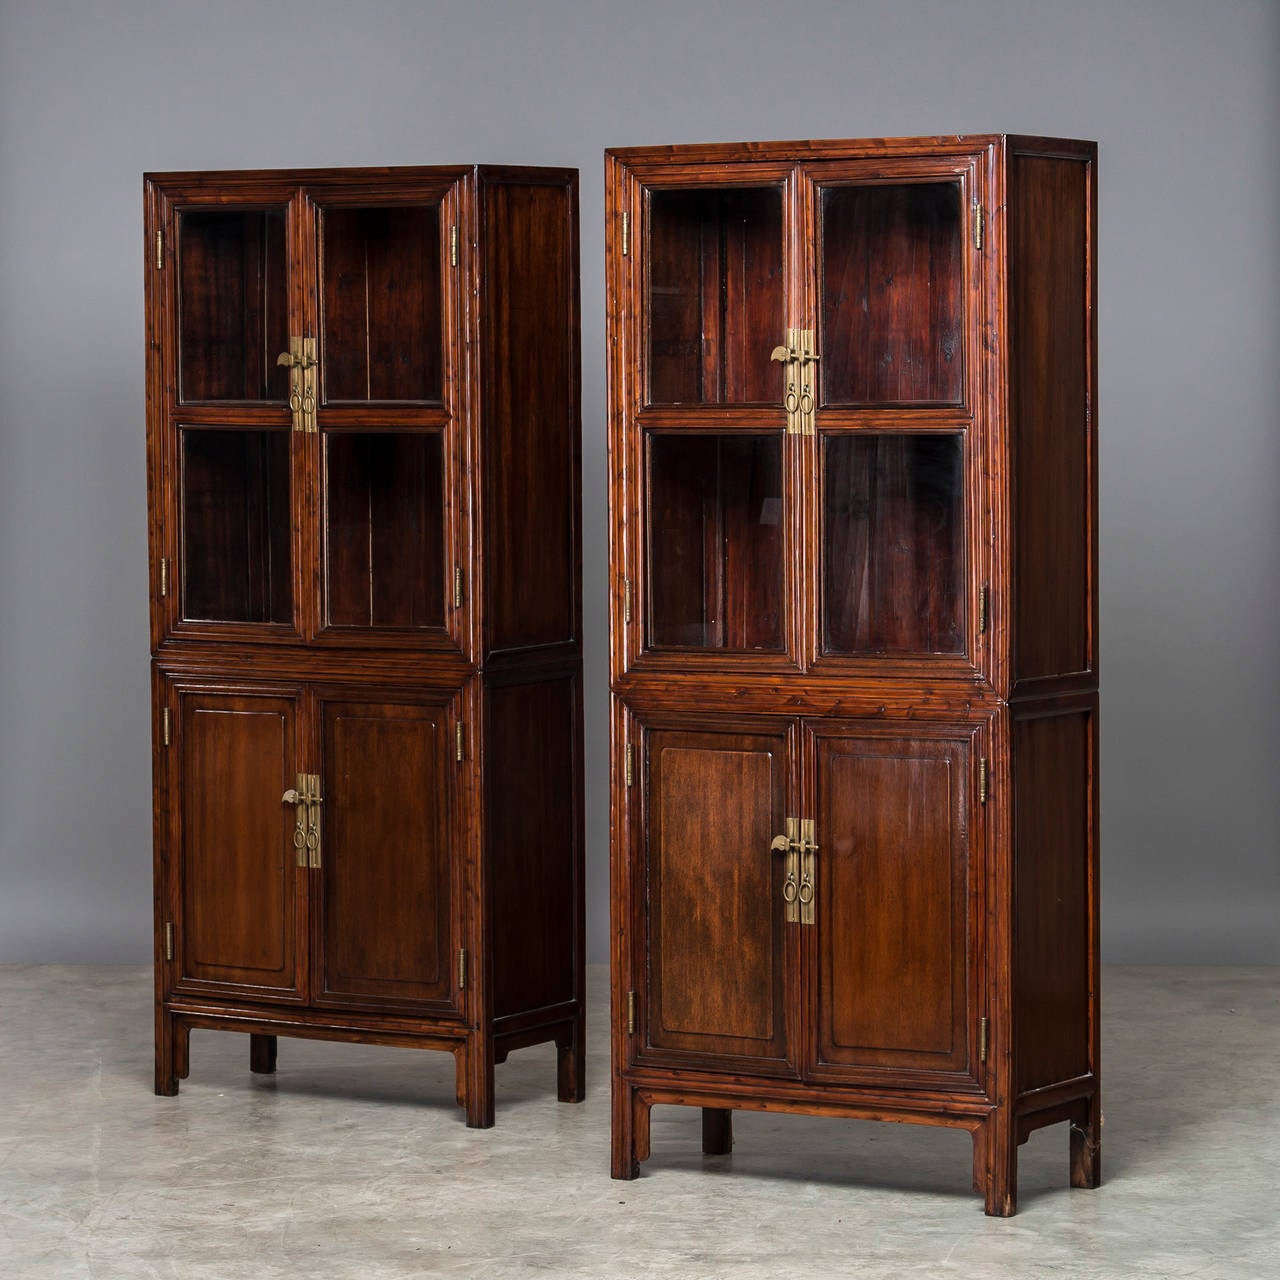 Pair of vitrines made of peachwood - at the top with a pair of glass doors, at the bottom with a pair of paneled doors, Jiangsu province from 1860 to 1880. The vitrines are in one piece. Sold as a pair for 7000 USD (Can be purchased individually)